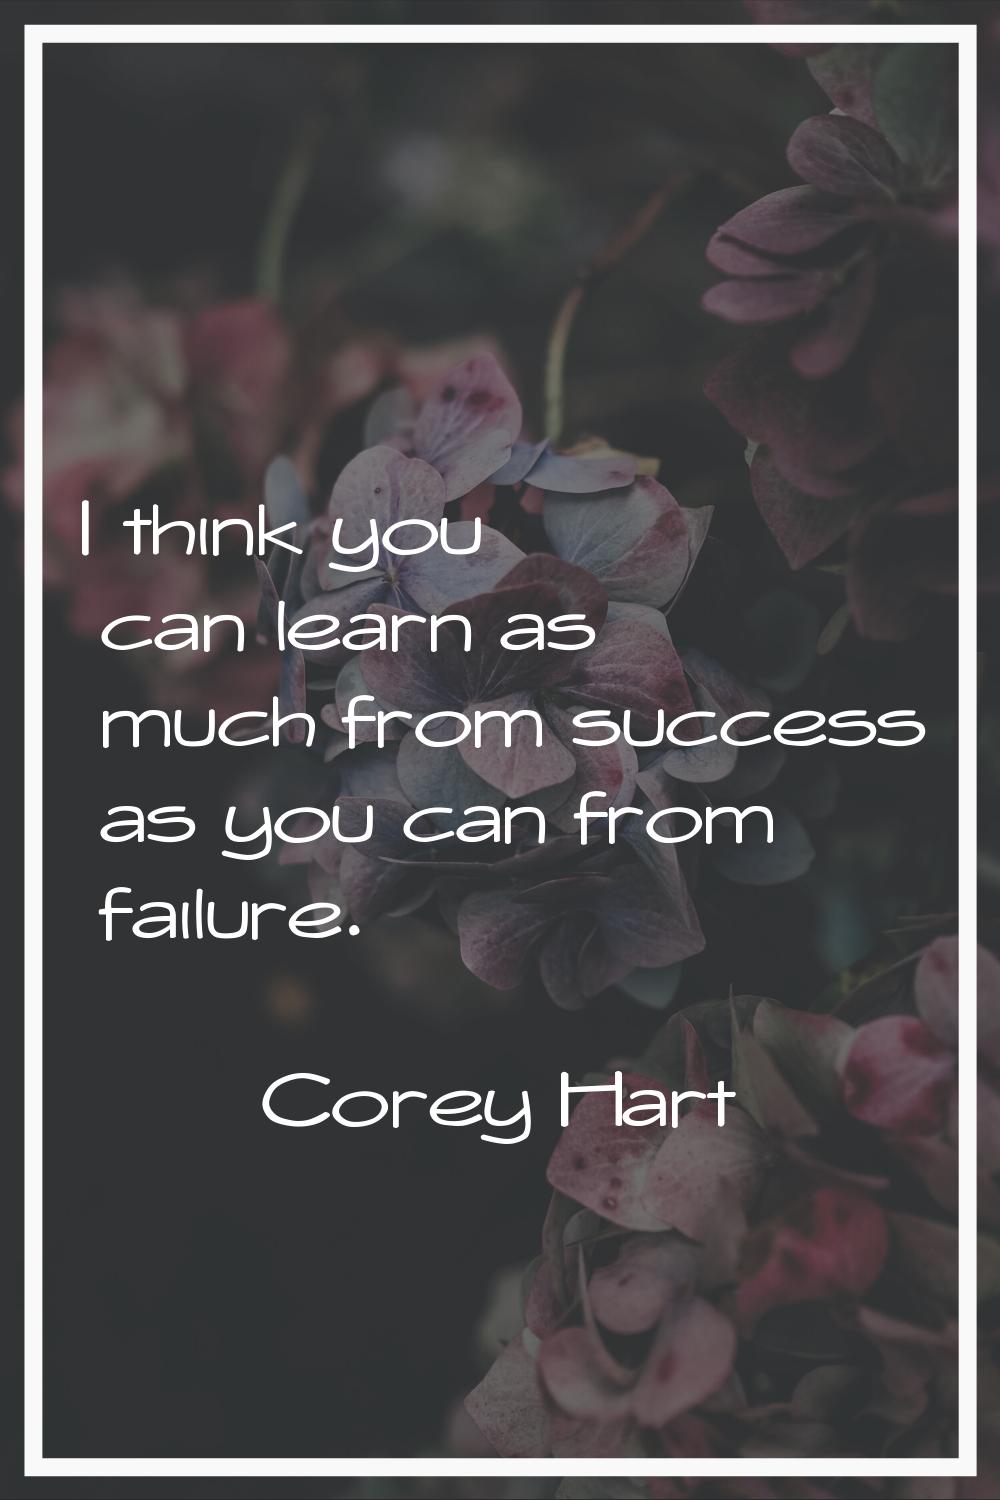 I think you can learn as much from success as you can from failure.